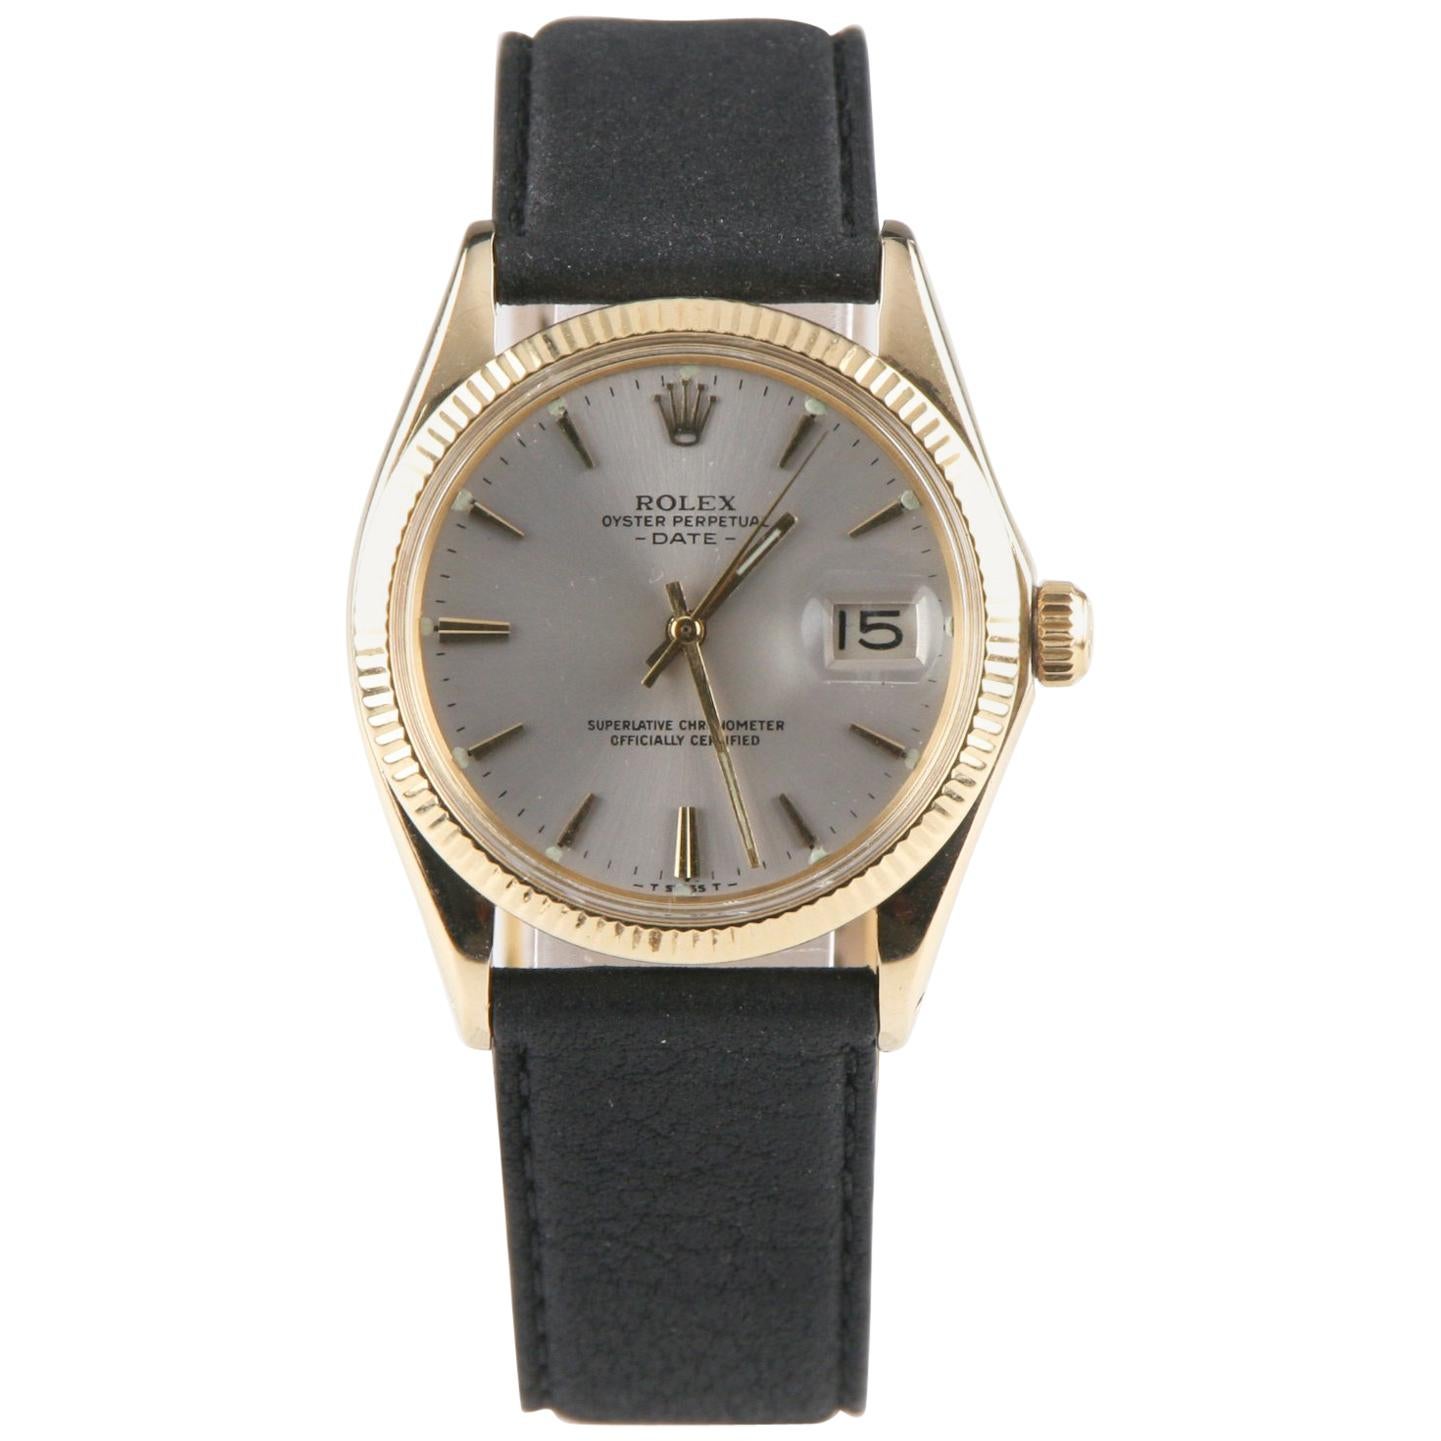 Rolex Oyster Perpetual Date #1503 14 Karat Gold with Leather Band Men's Watch